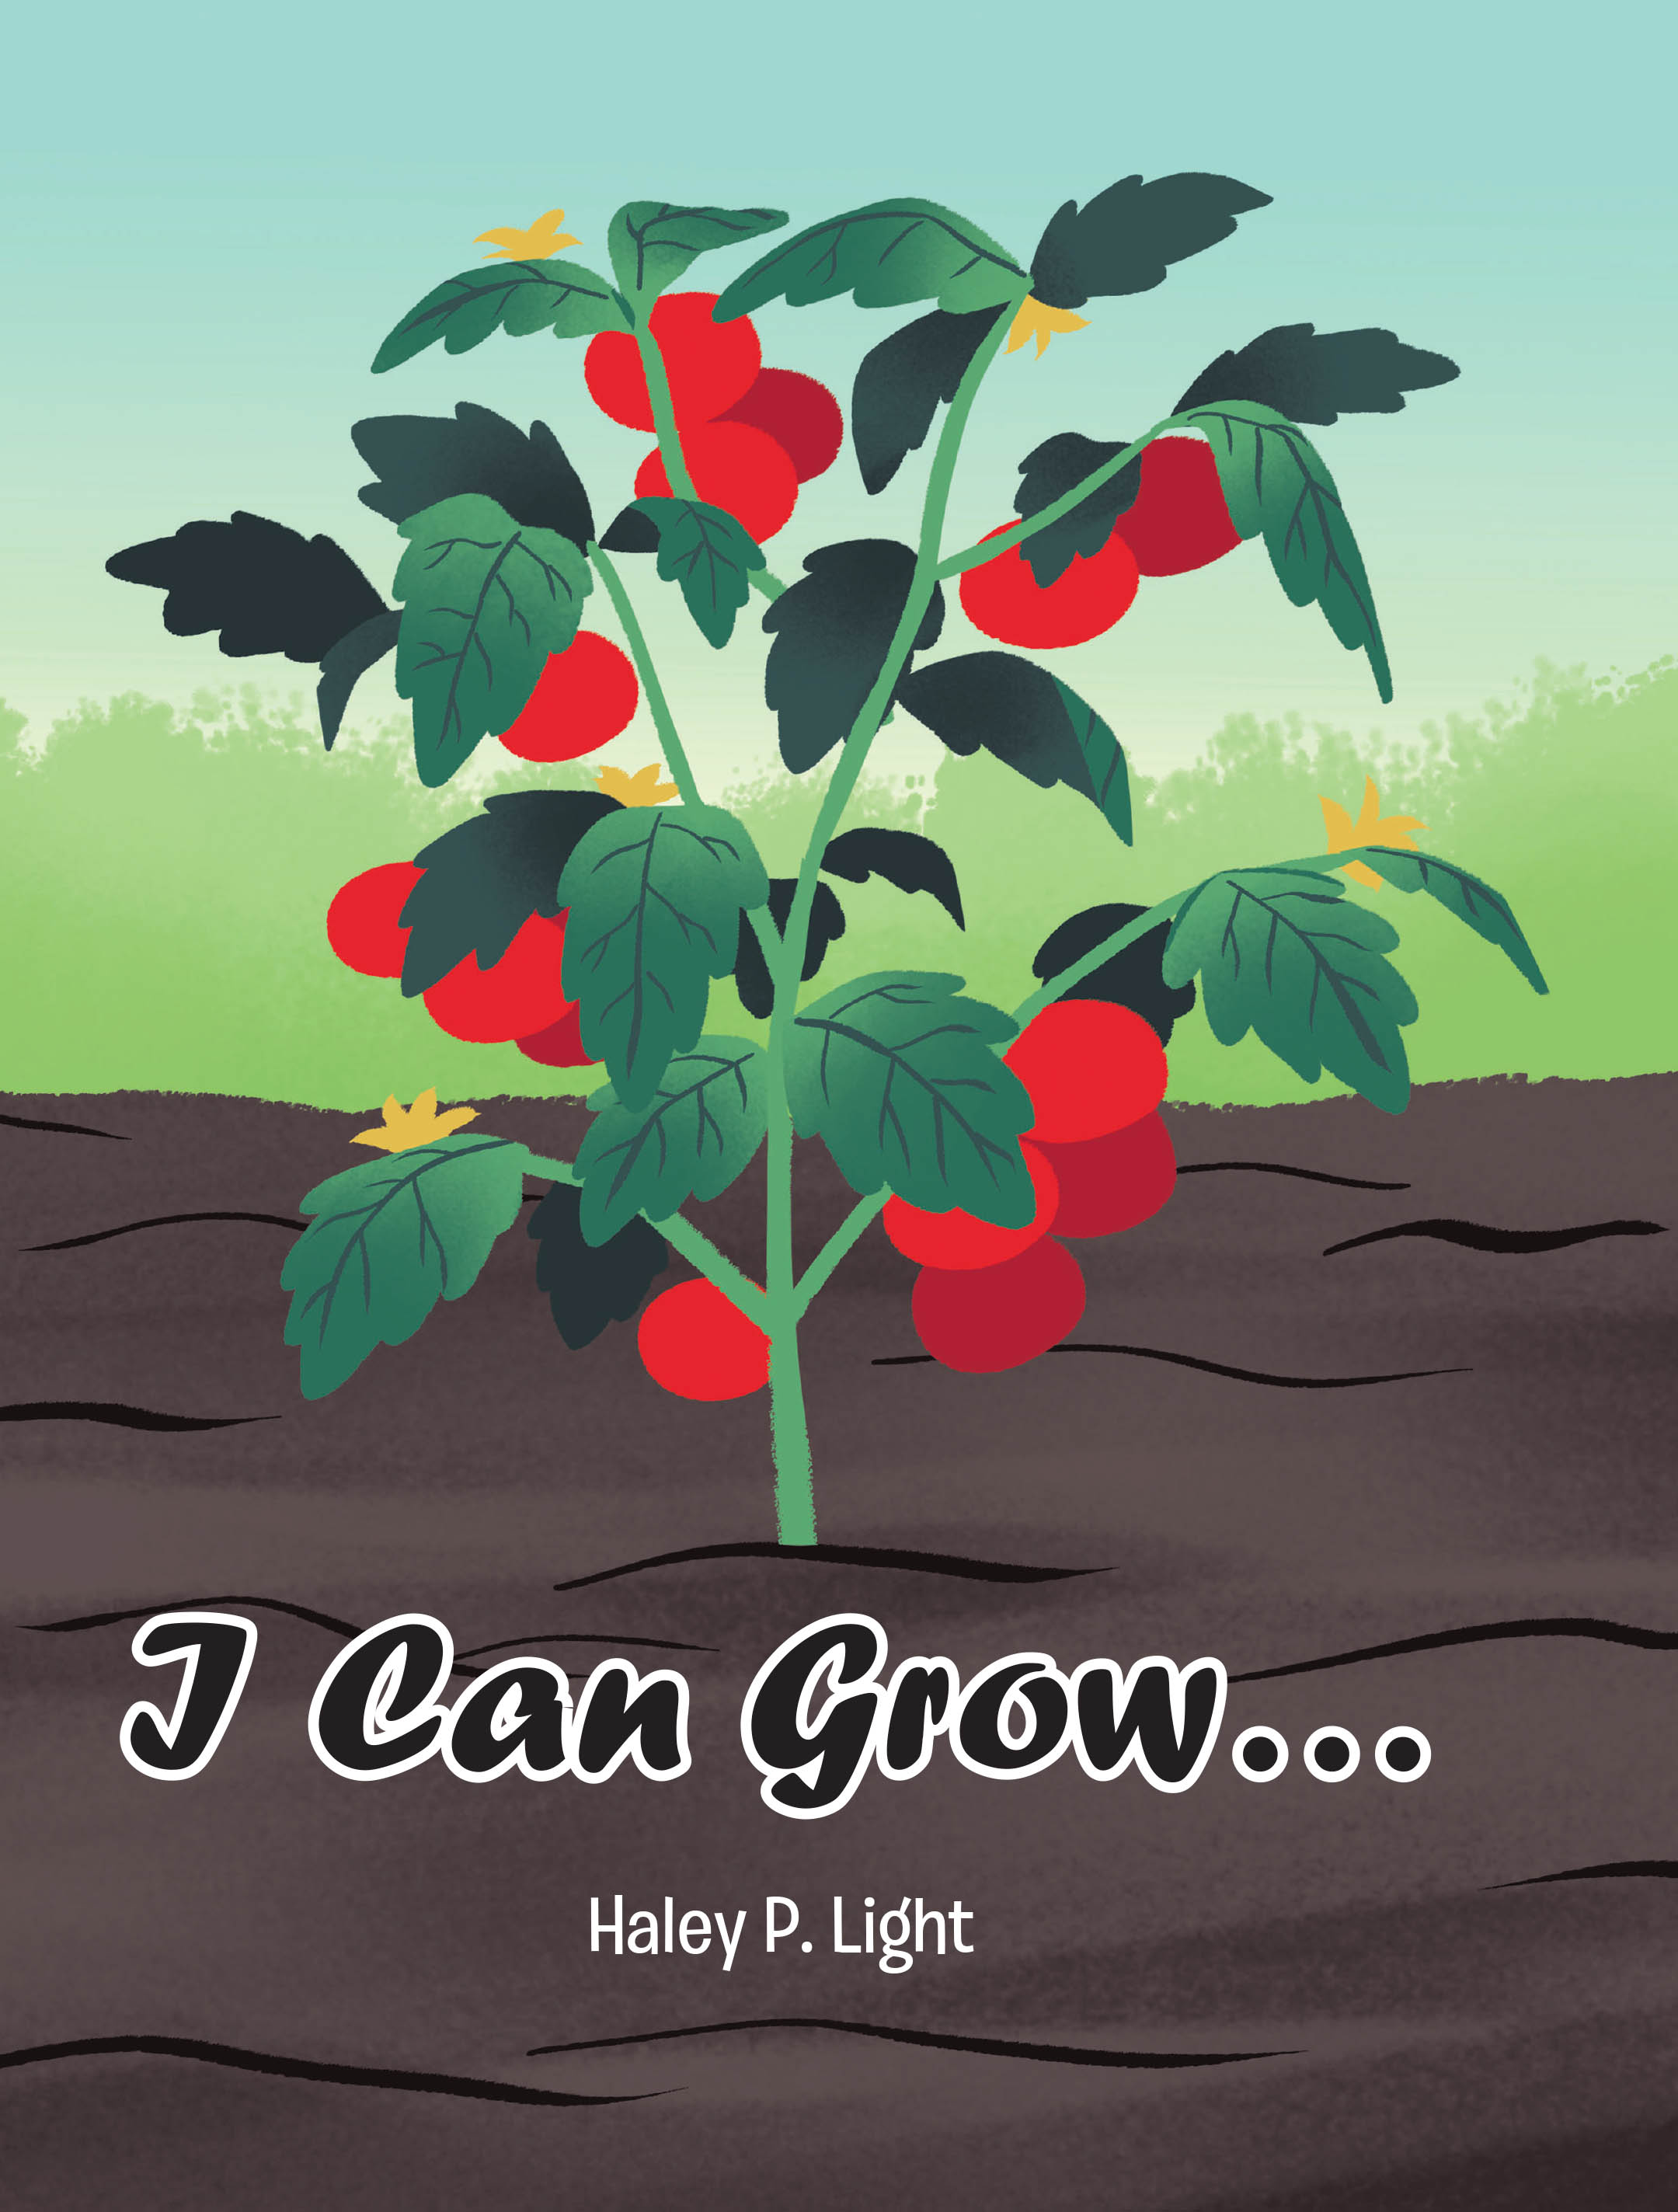 Haley P. Light’s Newly Released "I Can Grow..." is a Charming Story That Shares Fun Facts While Imparting Cleverly Presented Lessons of Faith